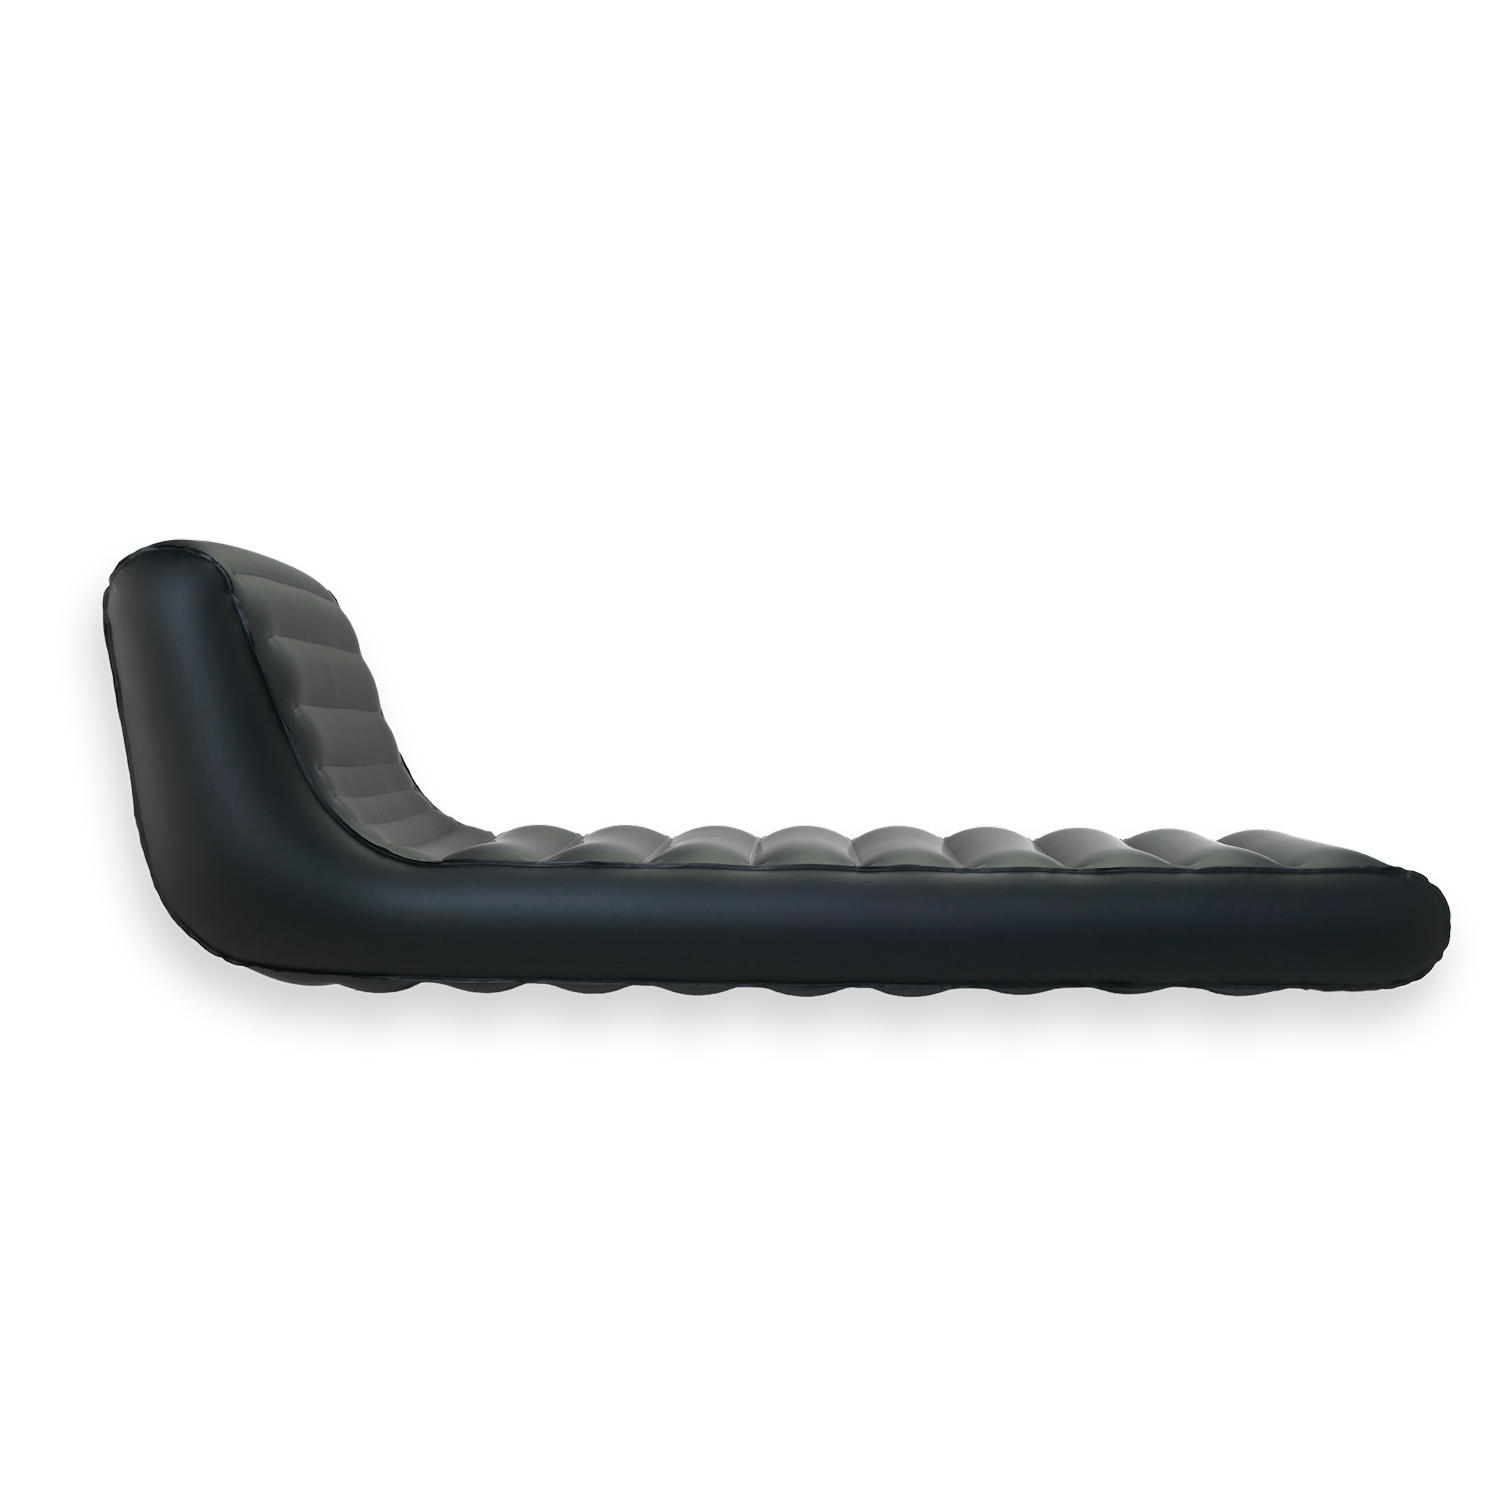 The side profile and backrest angle of a single black TPU inflatable core for a luxury lilo.